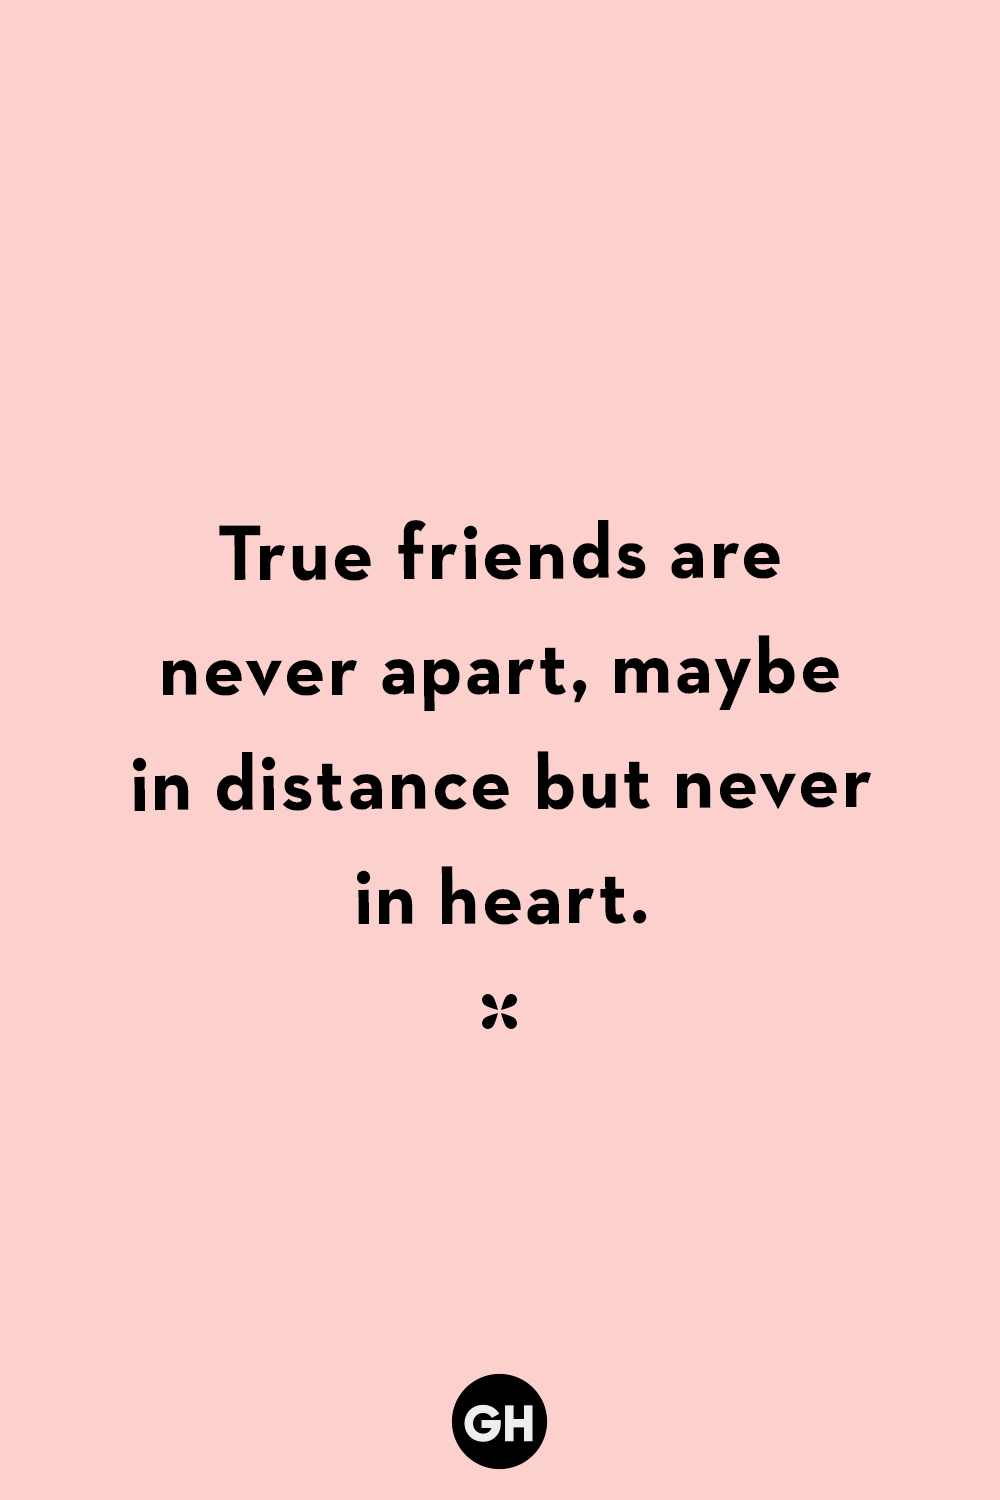 Detail Meaningful Friendship Quotes Nomer 22